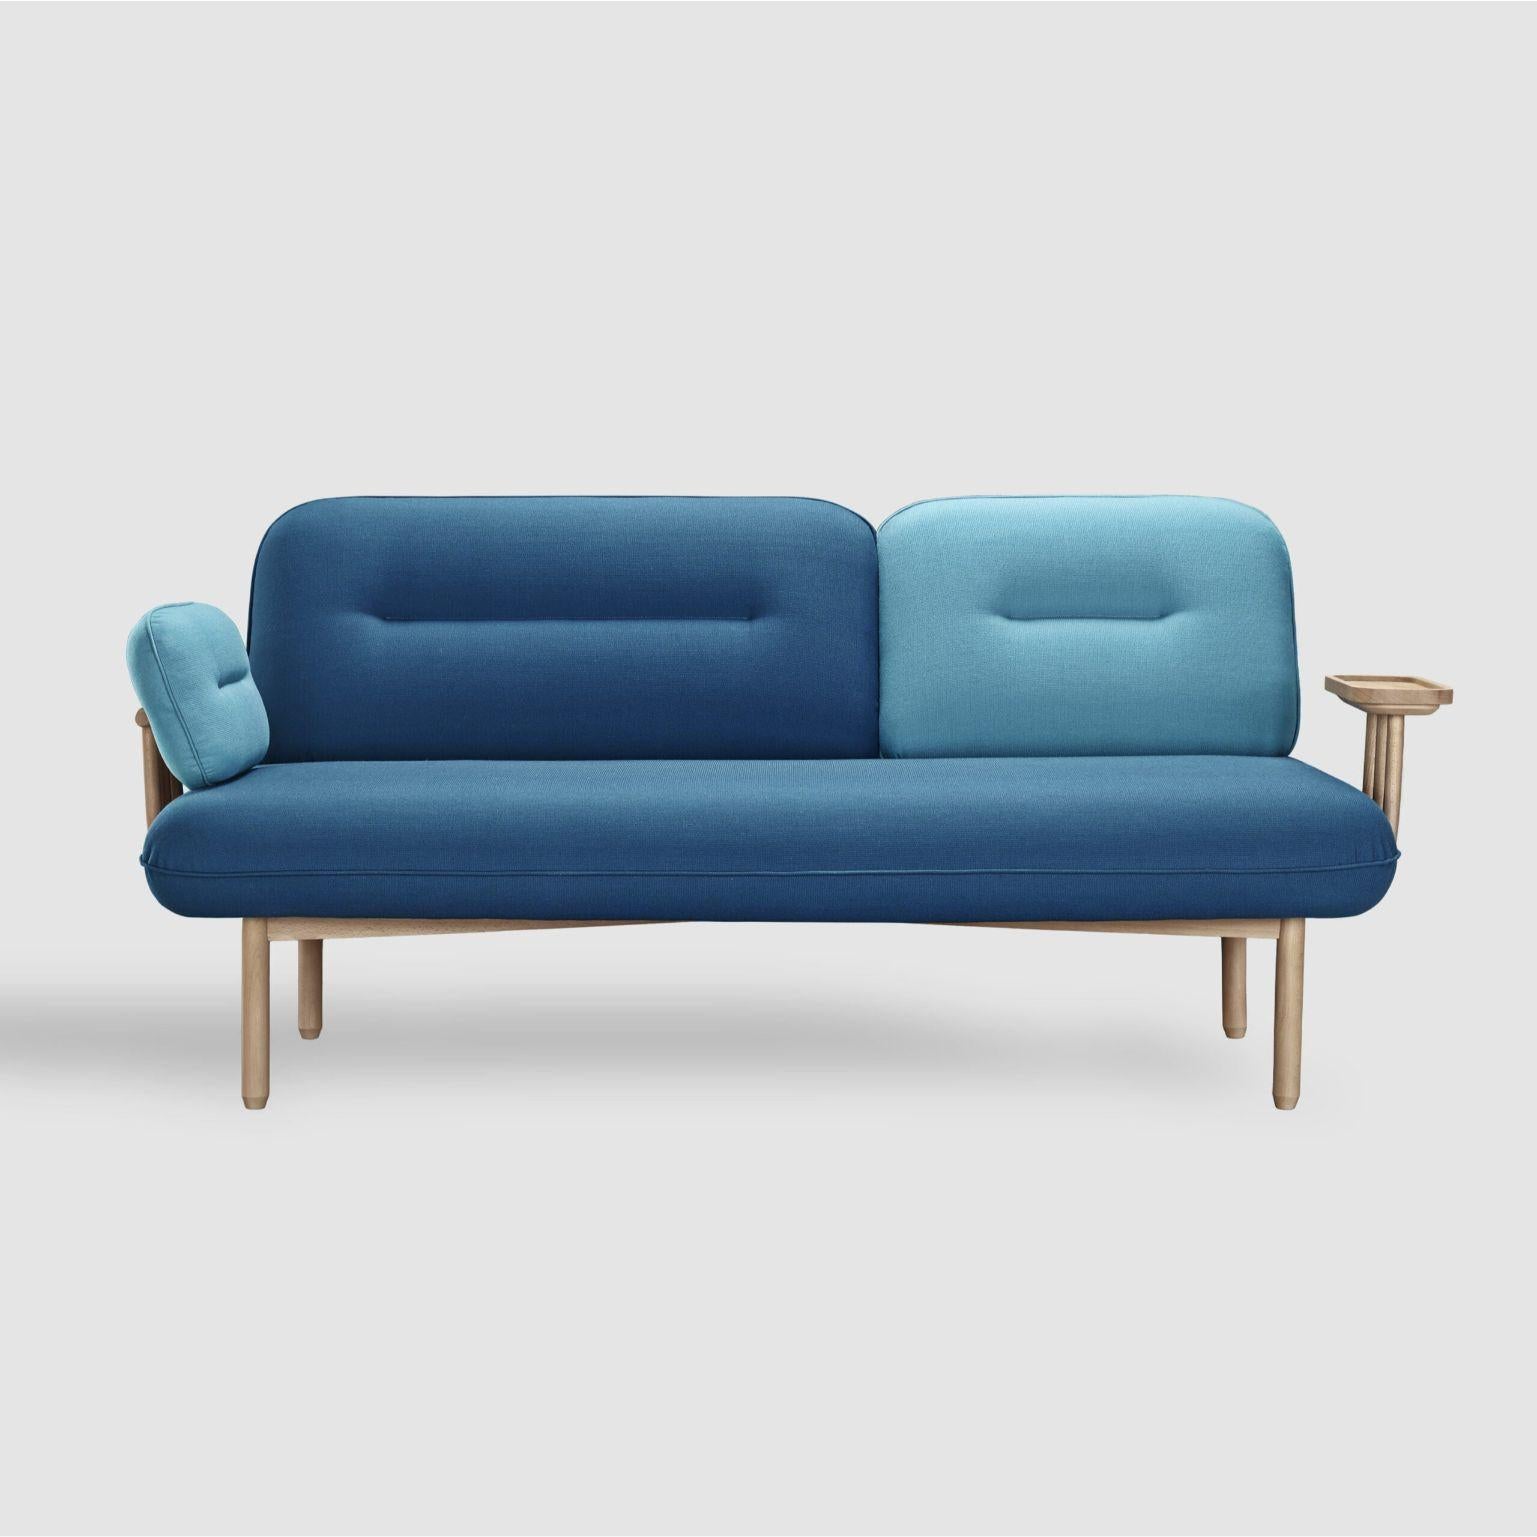 Blue Cosmo sofa by Pepe Albargues
Dimensions: W195, D85, H85, Seat45
Materials: Pine and beech wood structure reinforced with plywood
Arms and backrest frame treated with the steam bending technique
Foam CMHR (high resilience and flame